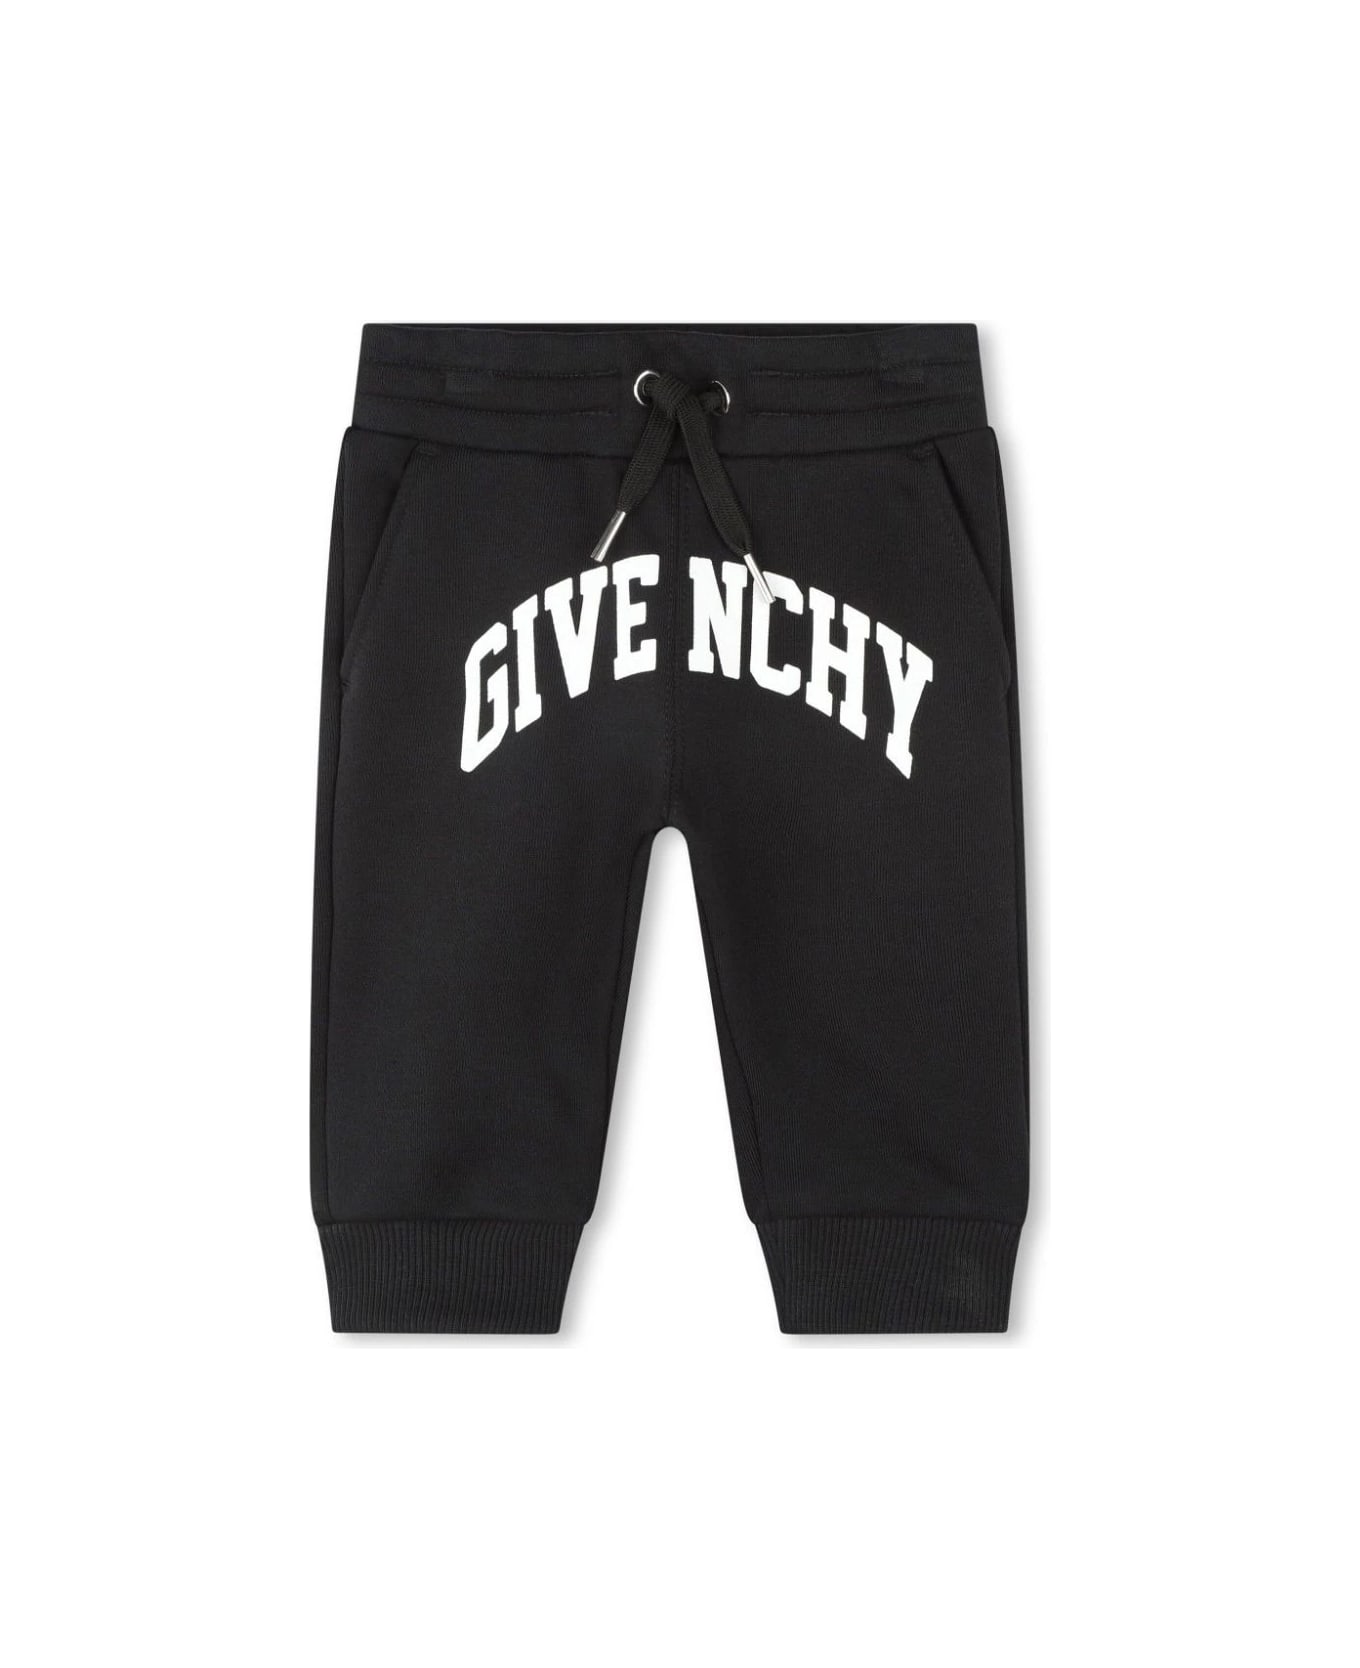 Givenchy Printed Sports Trousers - Black ボトムス